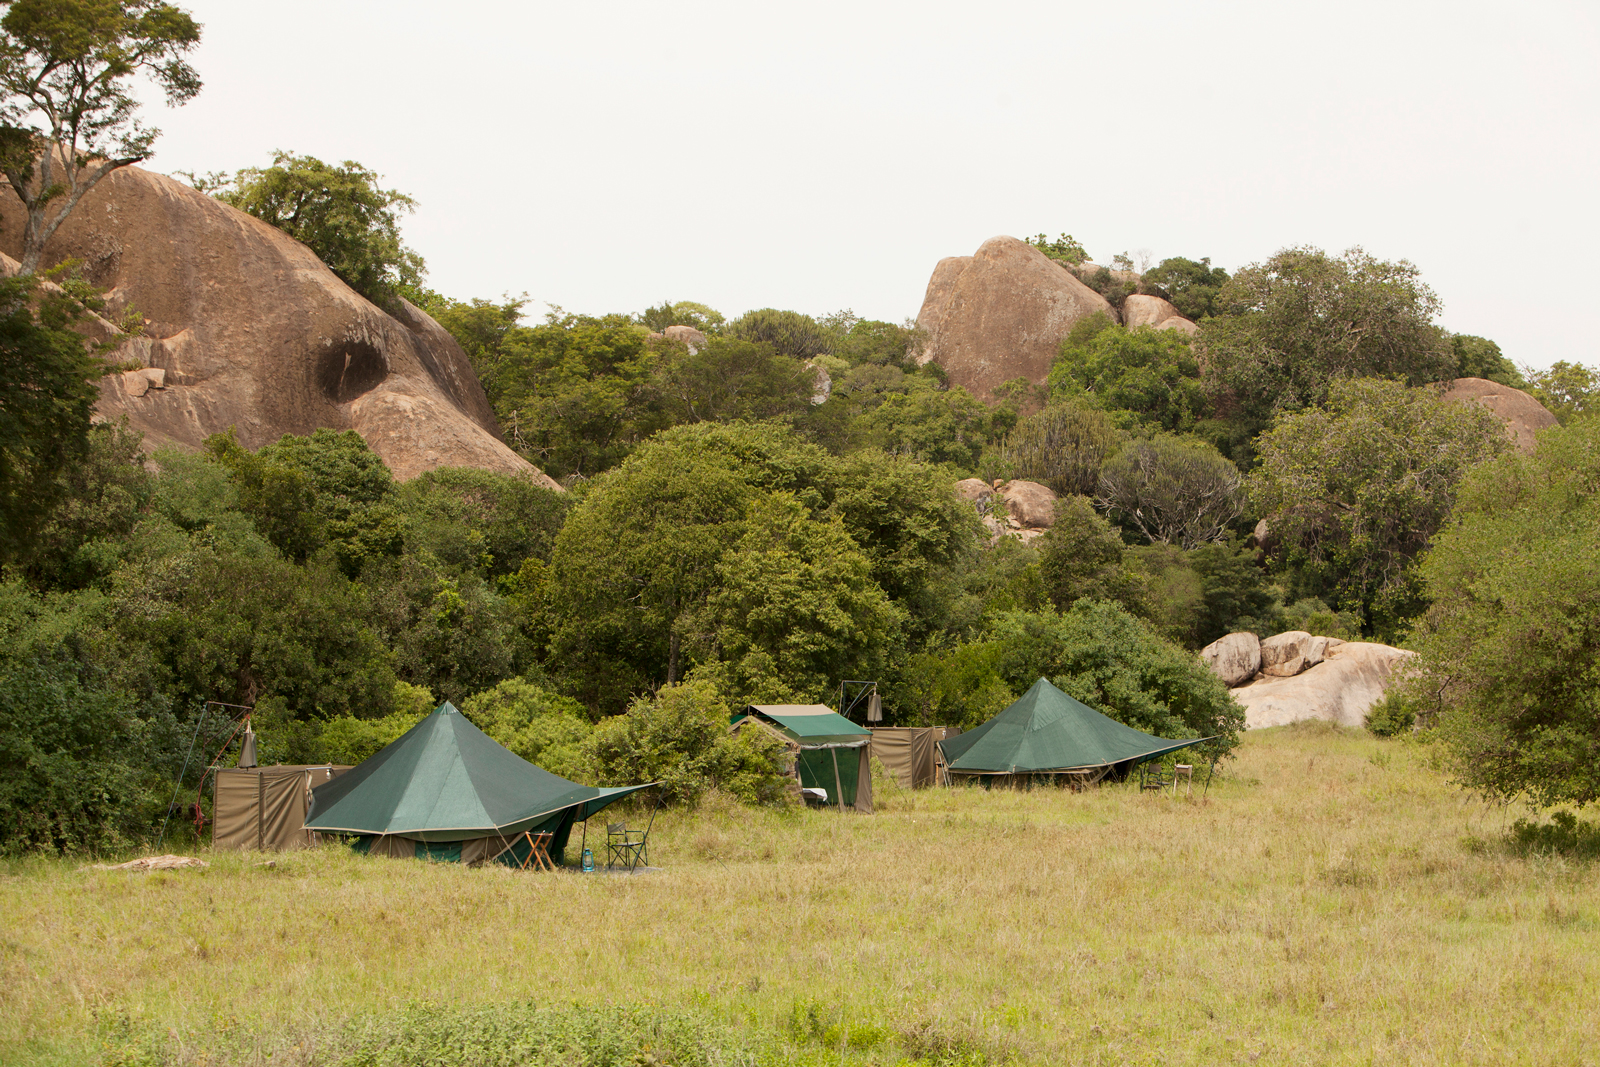 Wayo camp sites are off the beaten track and often secreted away in rocky areas or under riverine trees